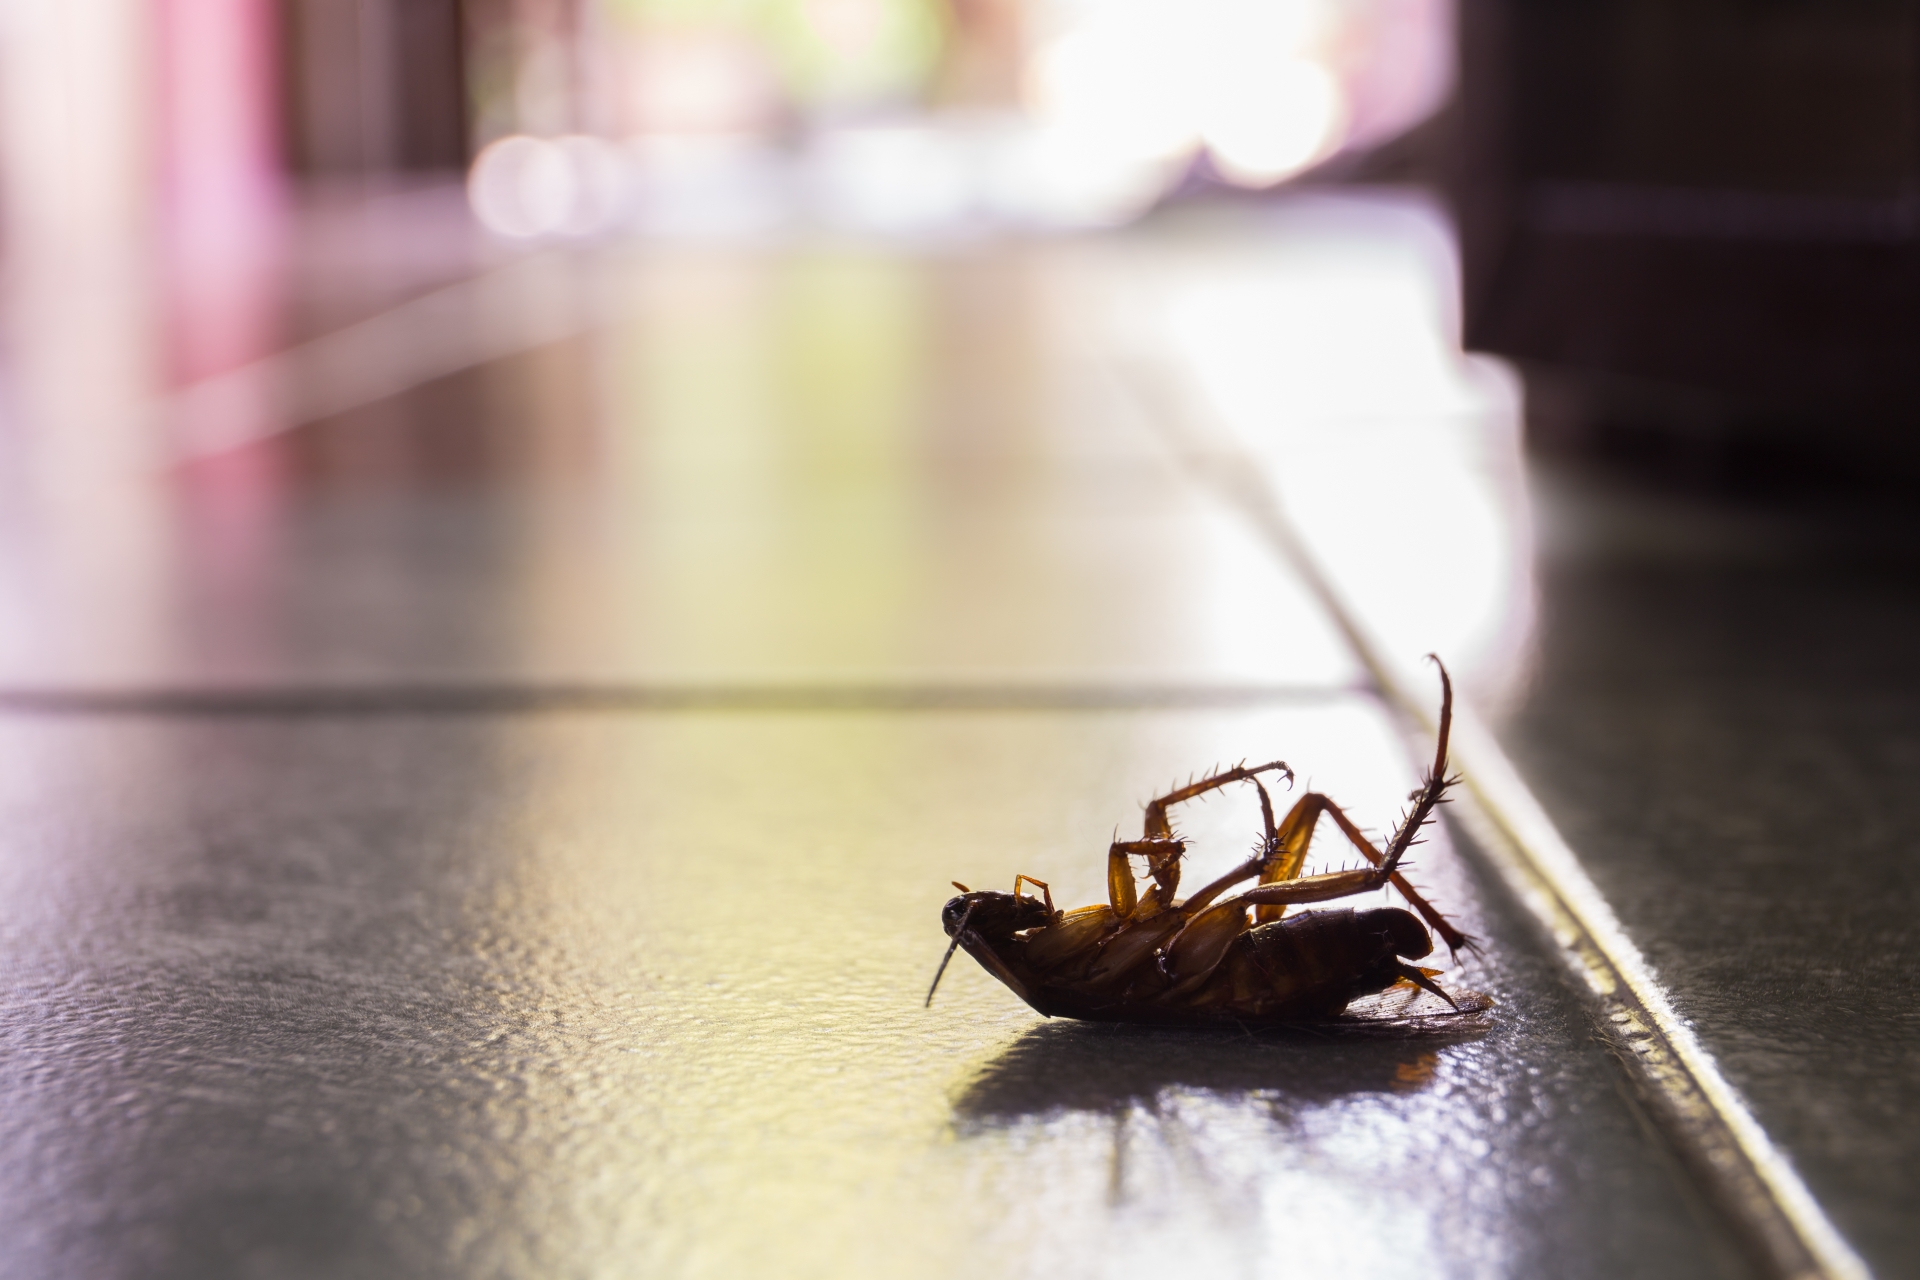 Cockroach Control, Pest Control in Balham, SW12. Call Now 020 8166 9746